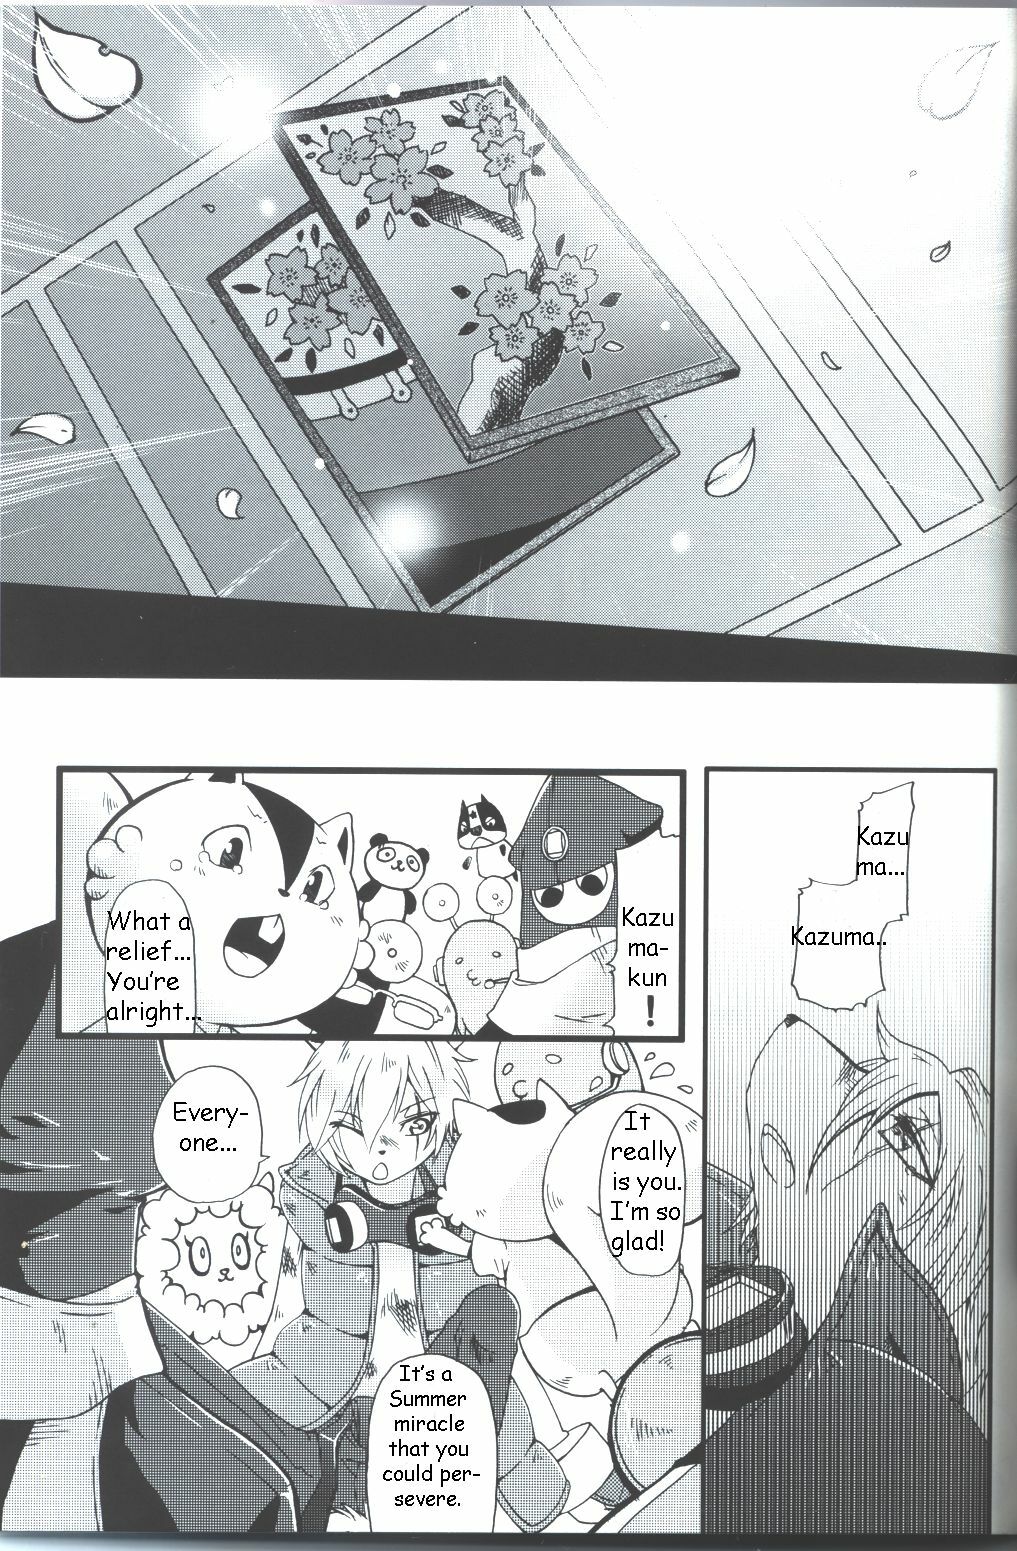 [Dogear (Inumimi Moeta)] Requirements of the King (Summer Wars) [English] page 21 full